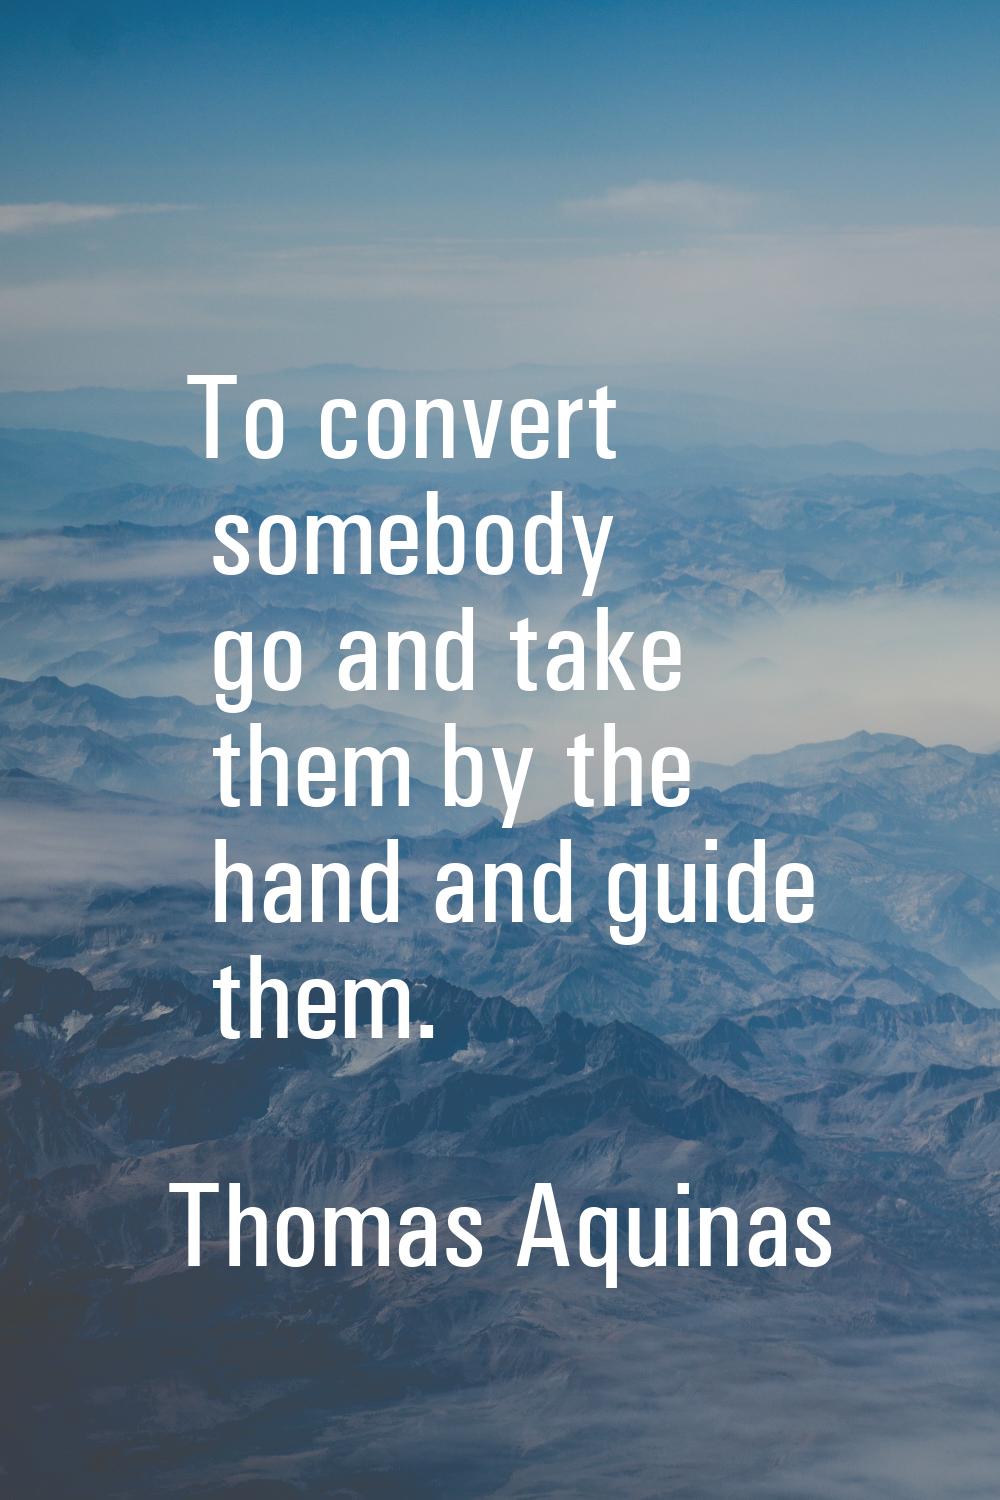 To convert somebody go and take them by the hand and guide them.